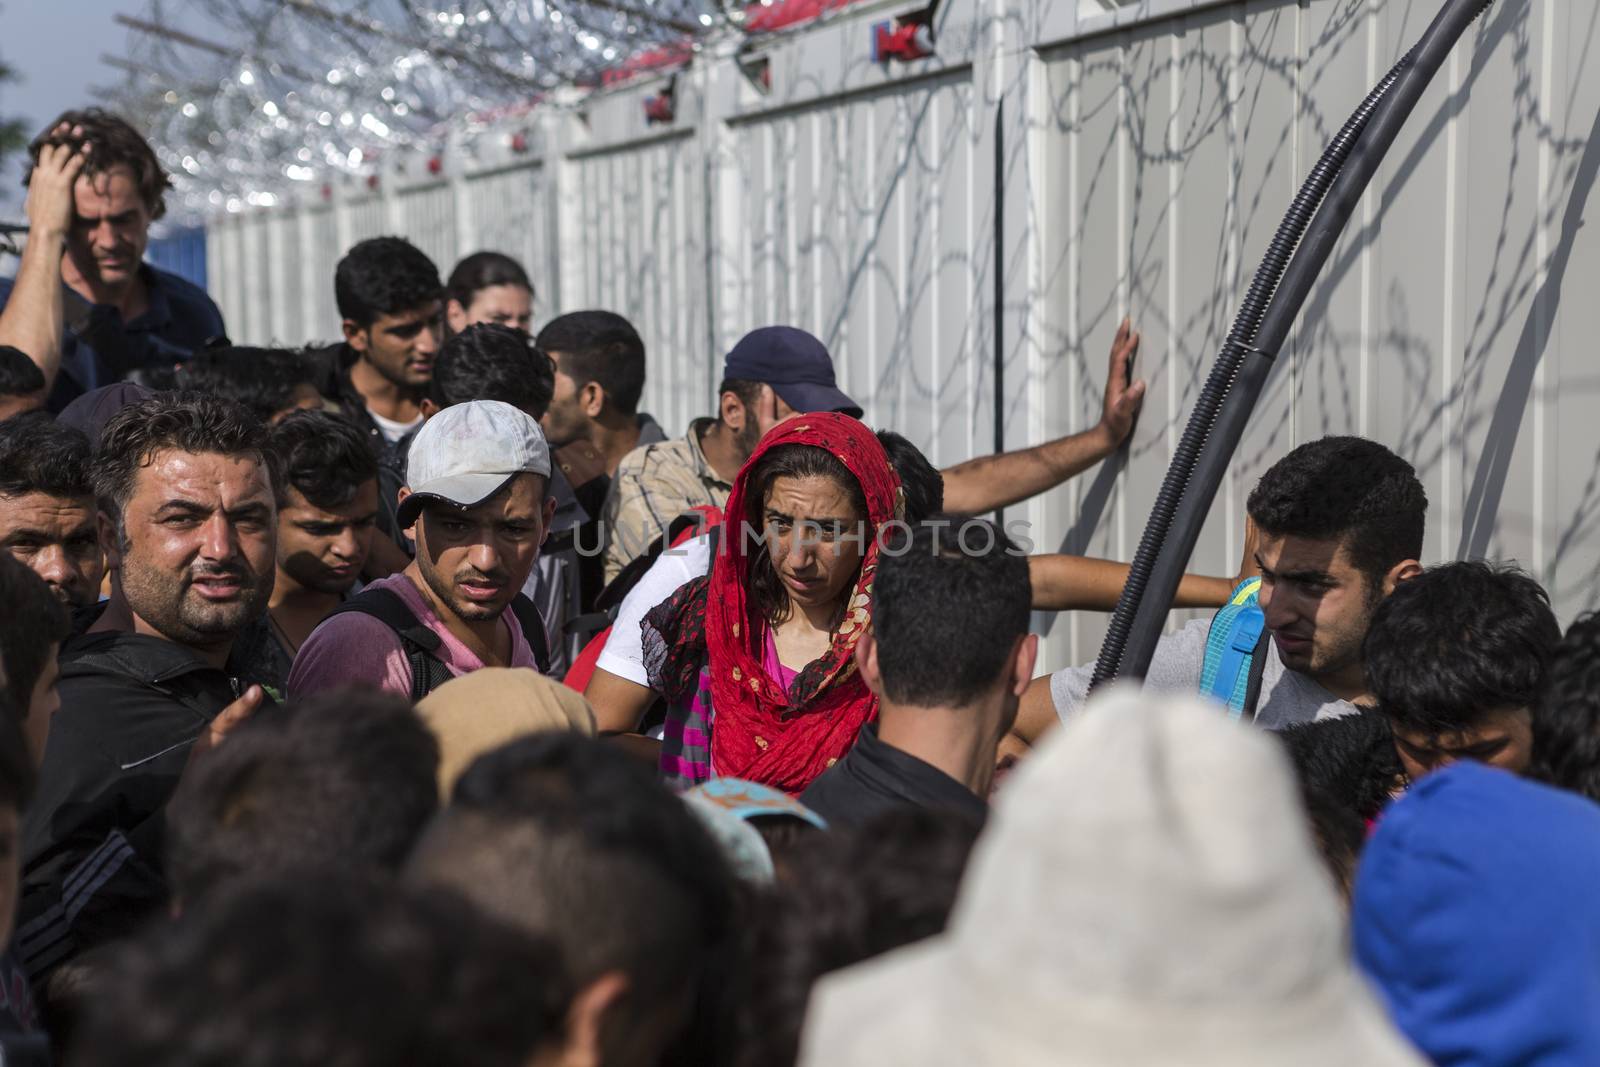 SERBIA, Horgos: Refugees stand at the Serbia-Hungary border after Hungary closed the border crossing on September 16, 2015.****Restriction: Photo is not to be sold in Russia or Asia****